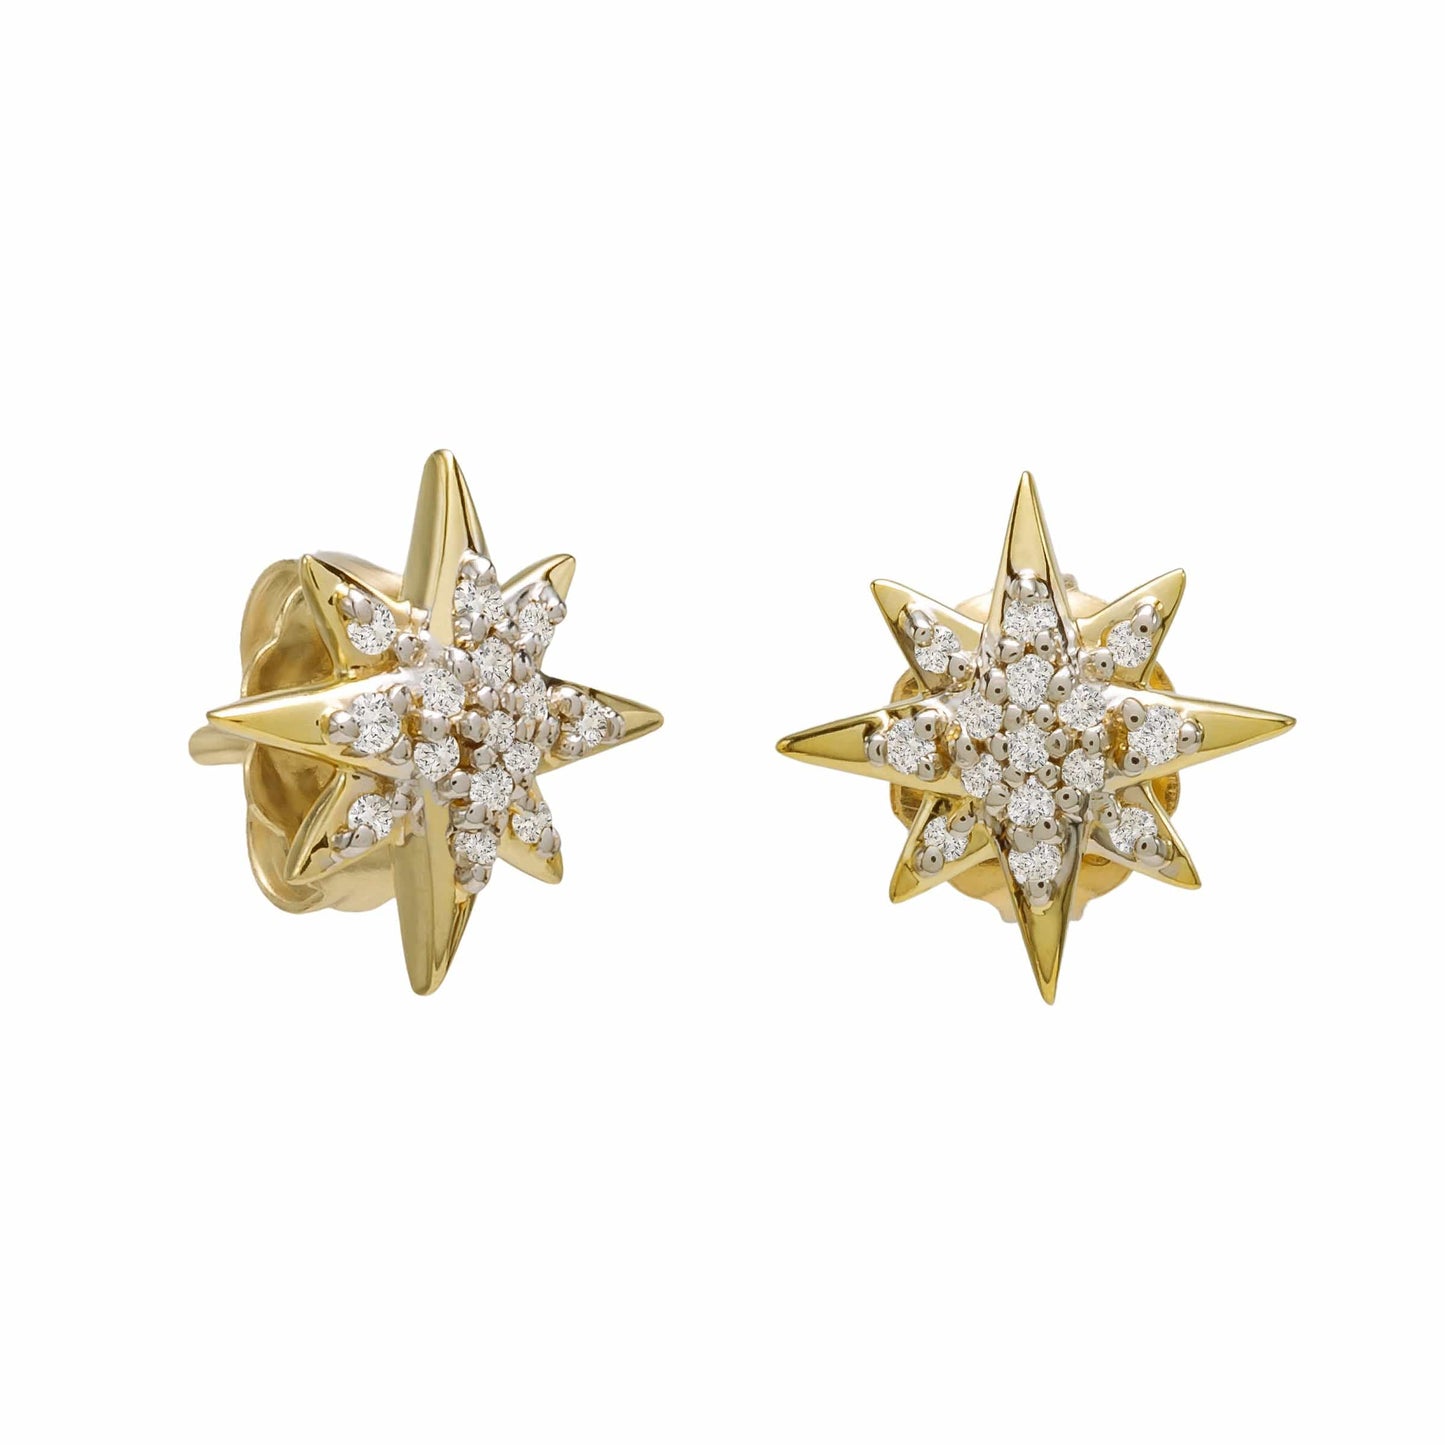 Dalia T Online Earing 0.06 / Yellow Gold Delicate Collection 14KT Yellow Gold Diamond Star Stud Earrings